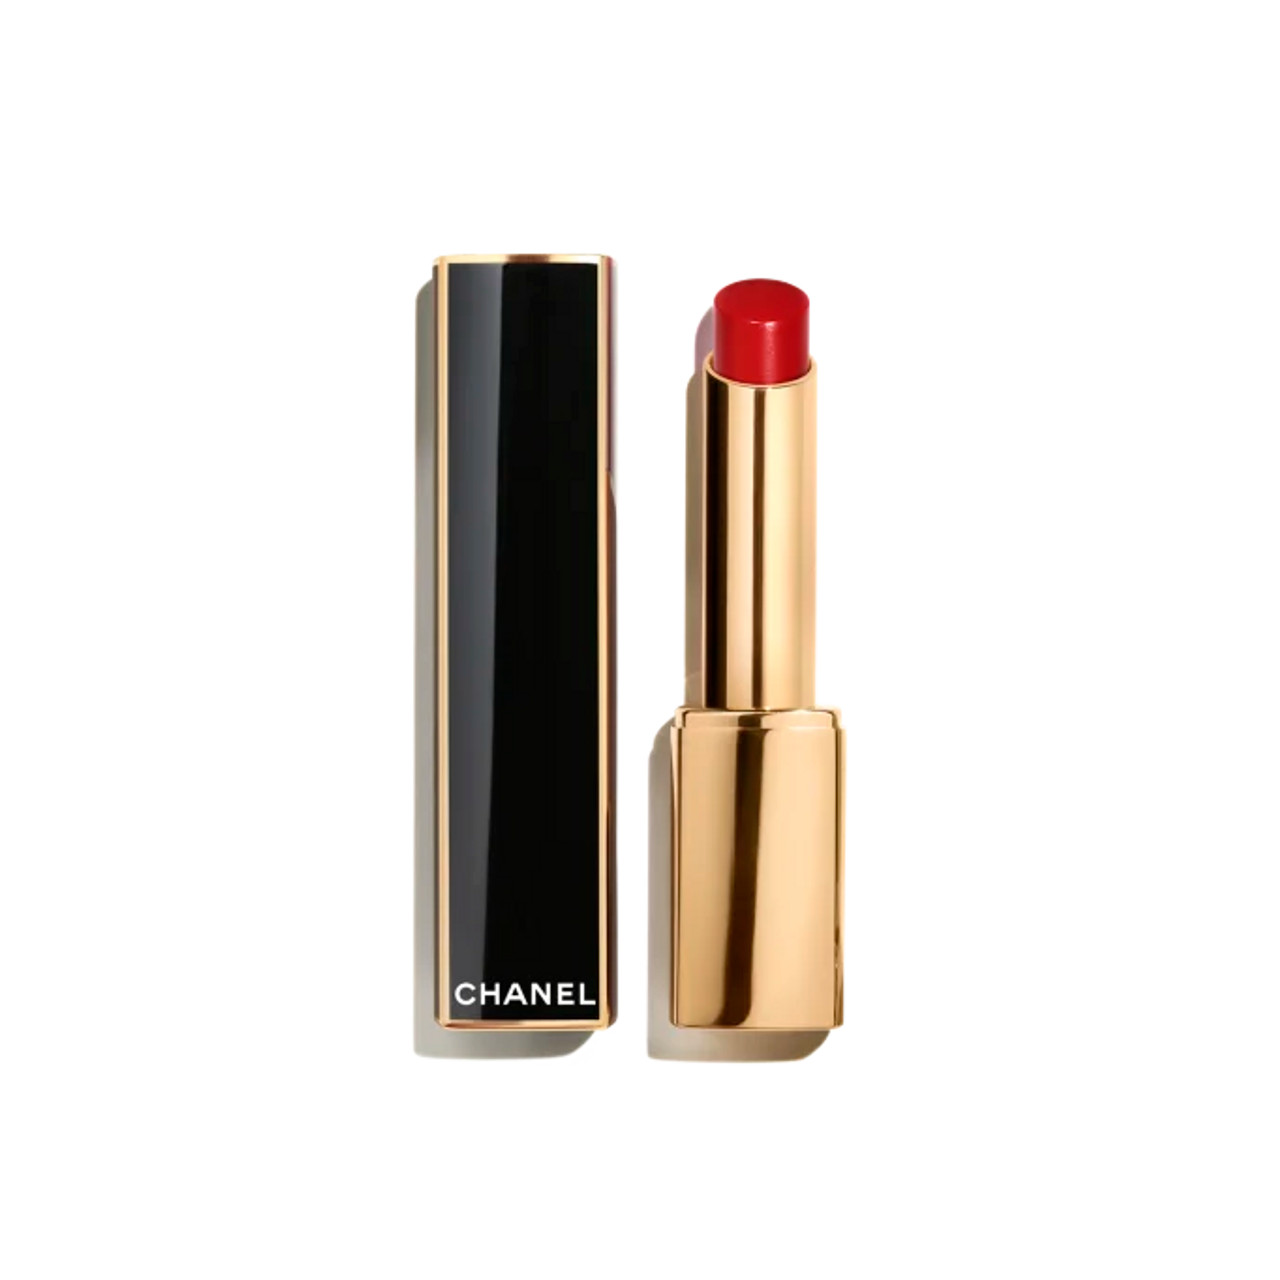 CHANEL Rouge Double Intensity Longwear Liquid Lipstick Review & Swatches 